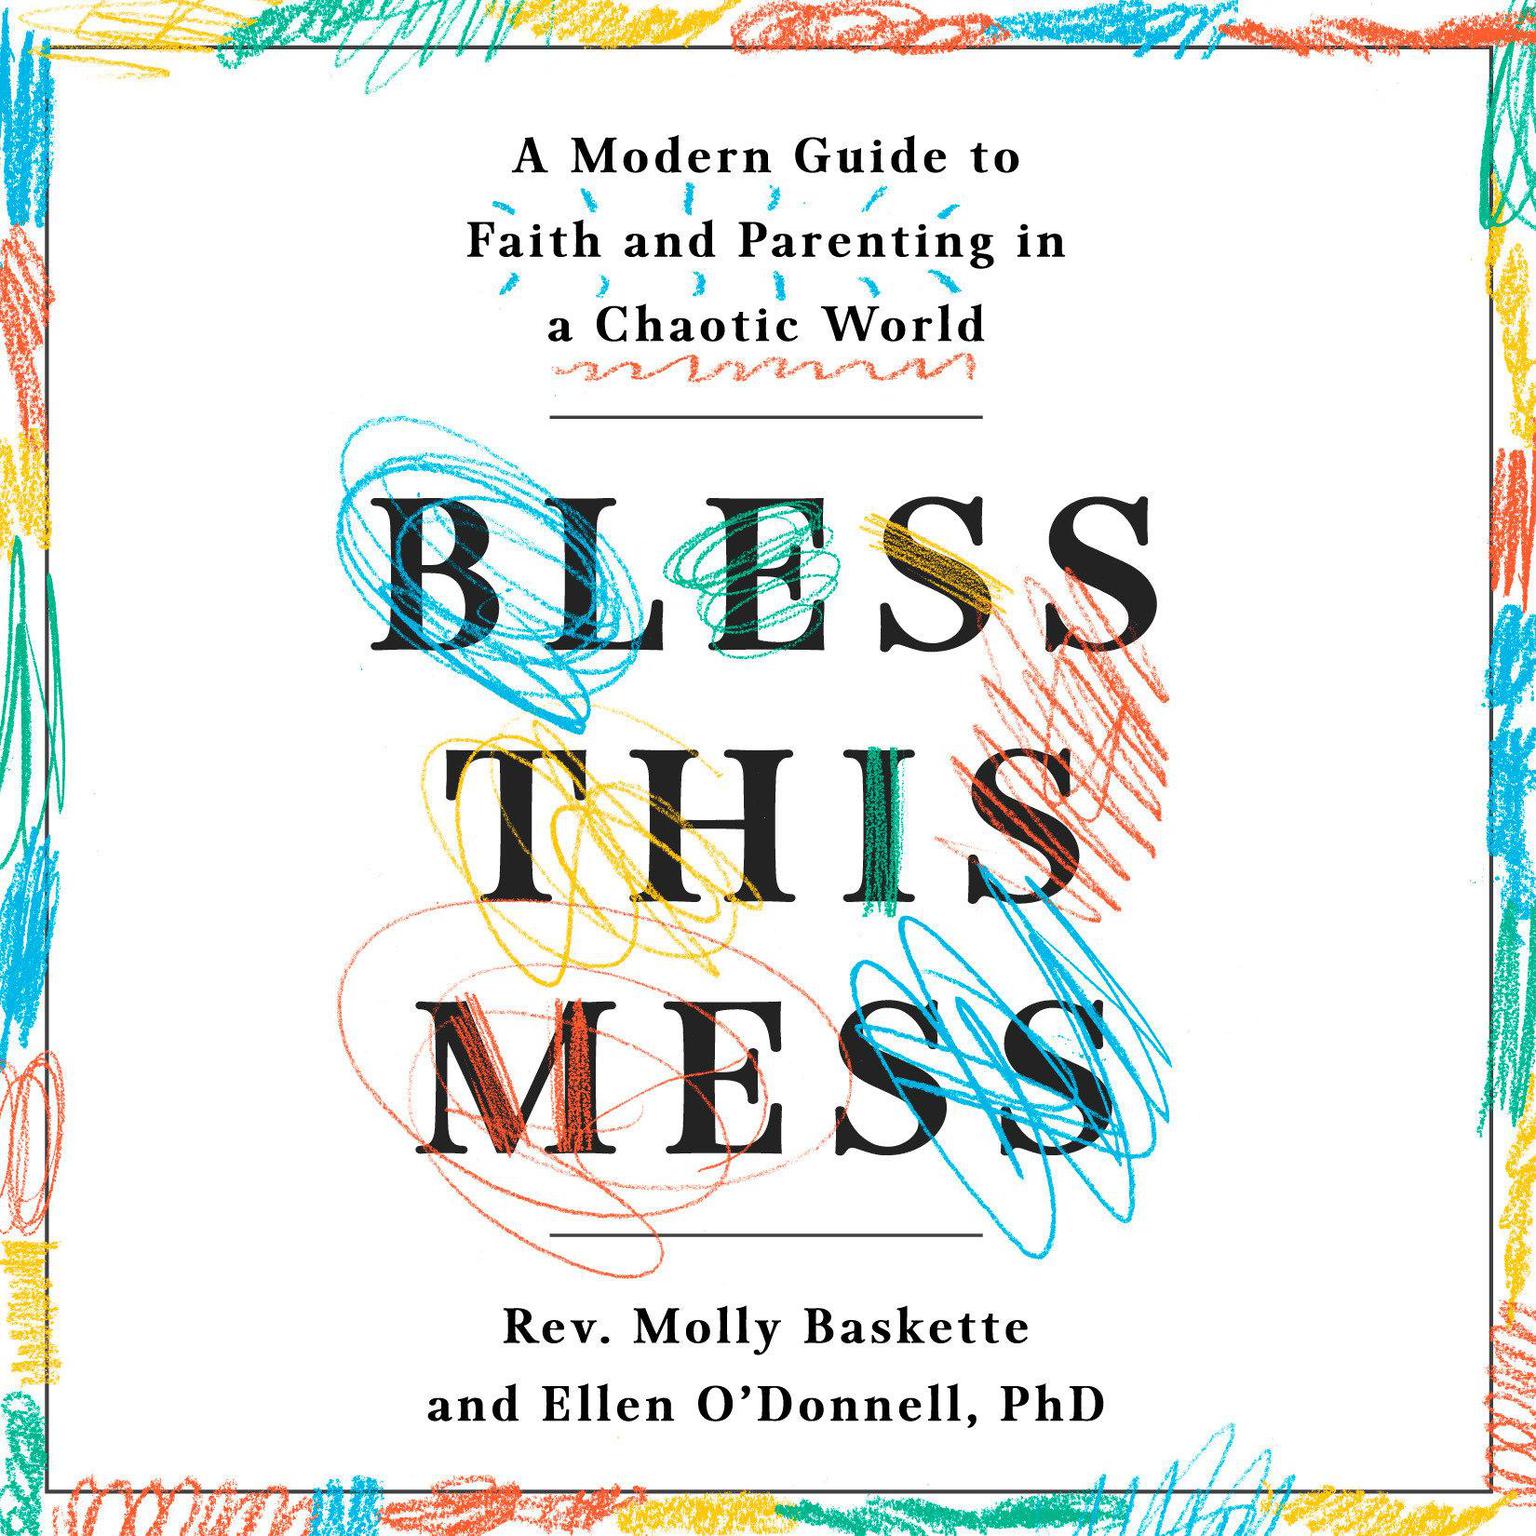 Bless This Mess: A Modern Guide to Faith and Parenting in a Chaotic World Audiobook, by Ellen O'Donnell